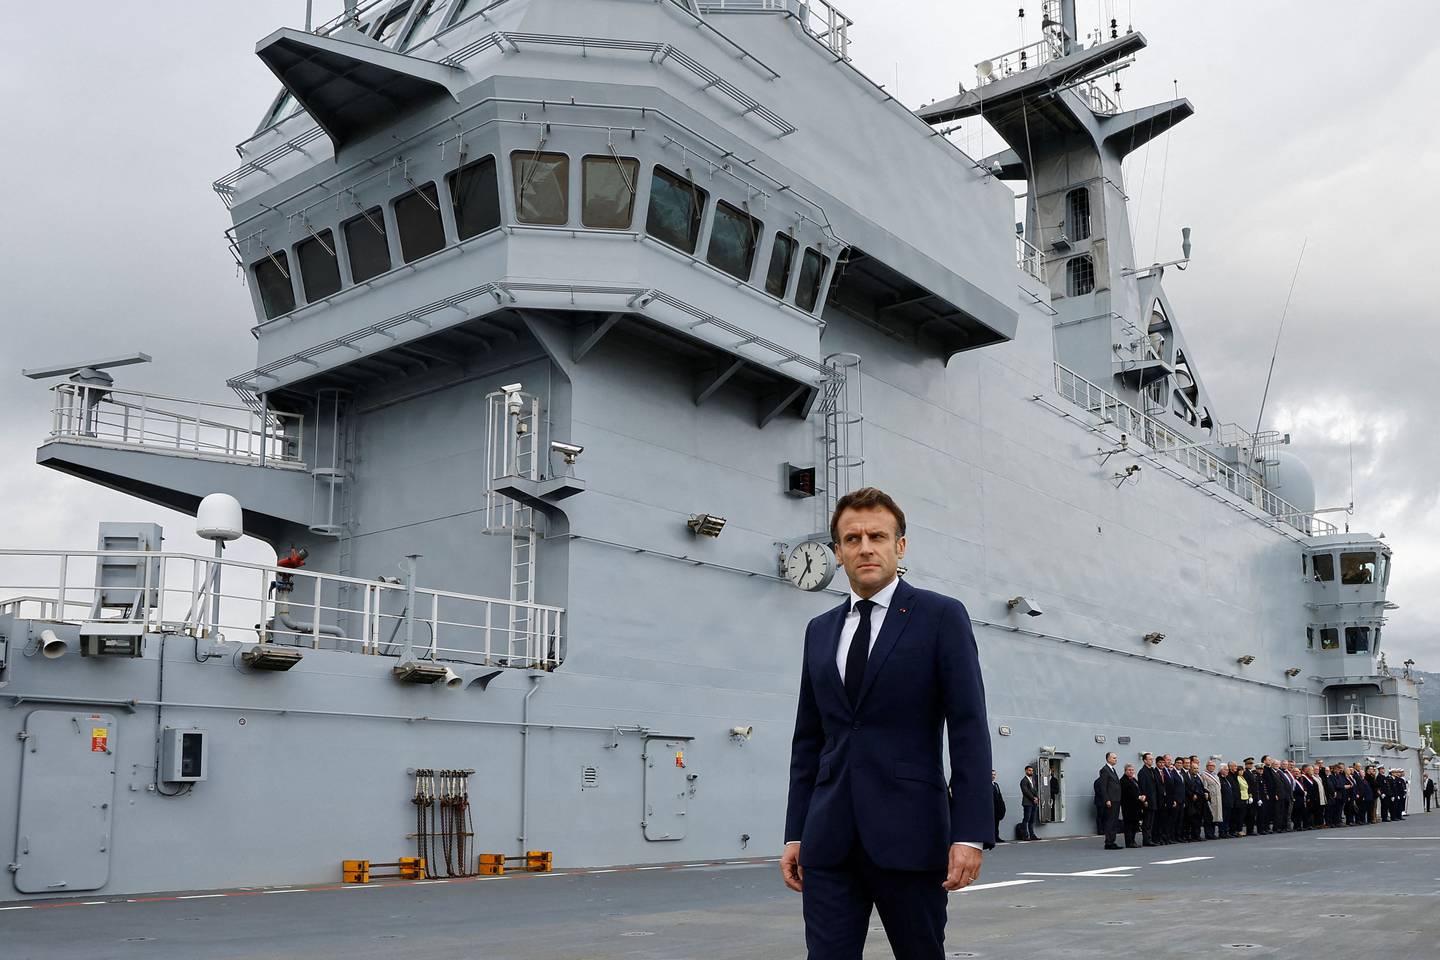 Mr Macron on the deck of the warship in the naval base of Toulon, southern France. AFP 